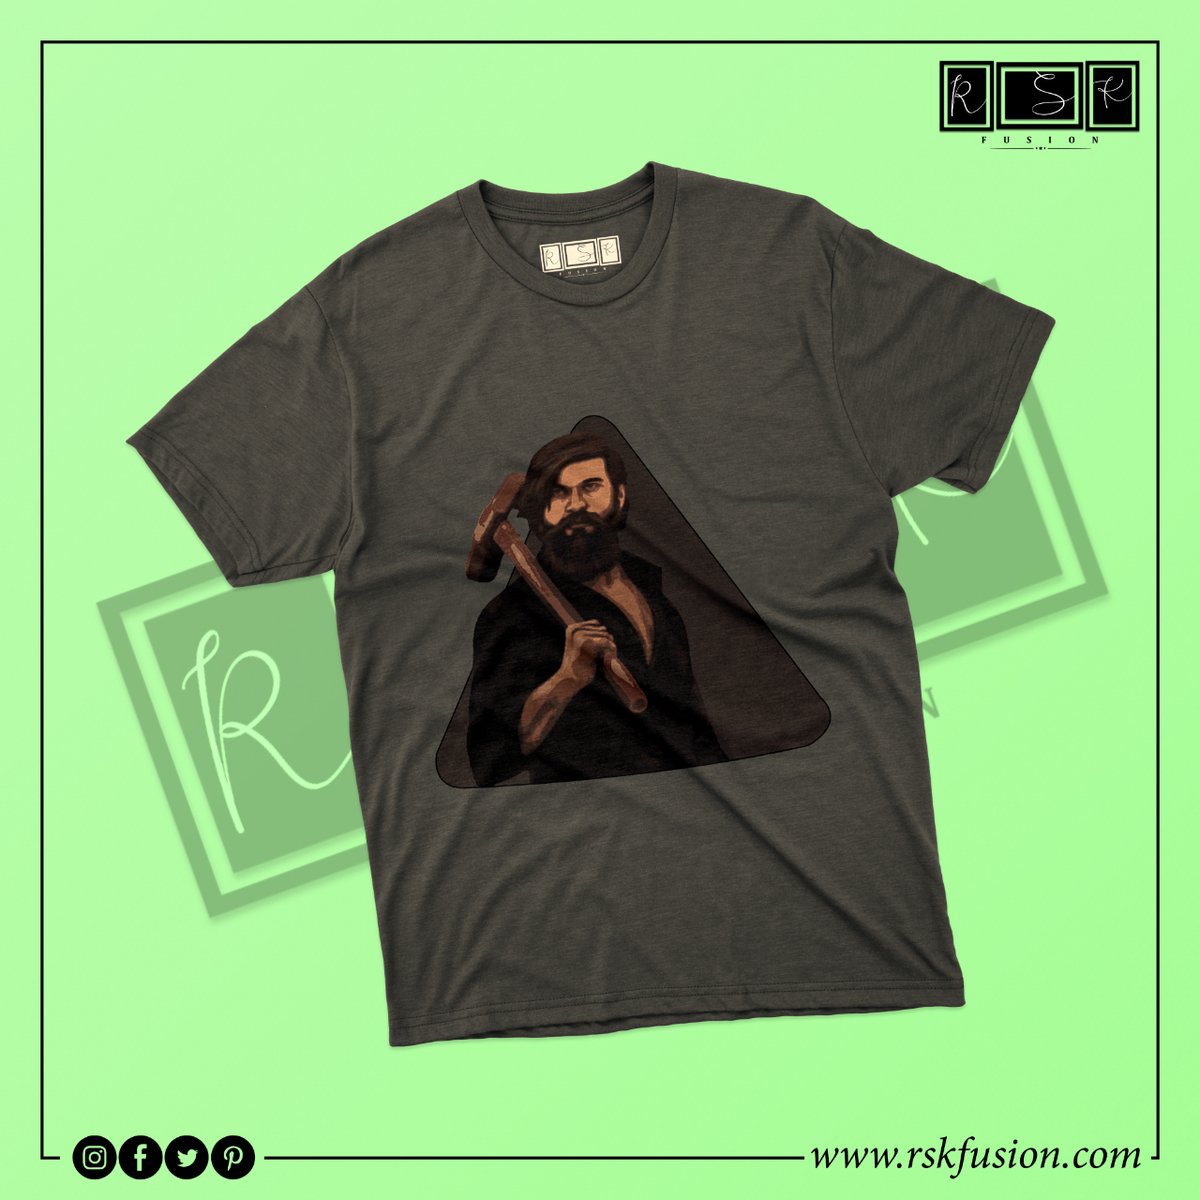 HERO is a person who says yes to the adventure., Be like a HERO!

Get customized T-Shirts now at rskfusion.com

#rskfusion #fashion #trending #trendyteeze #customizedtshirts #streetstyle #tshirtprinting #customtshirts #printables #tshirtstore